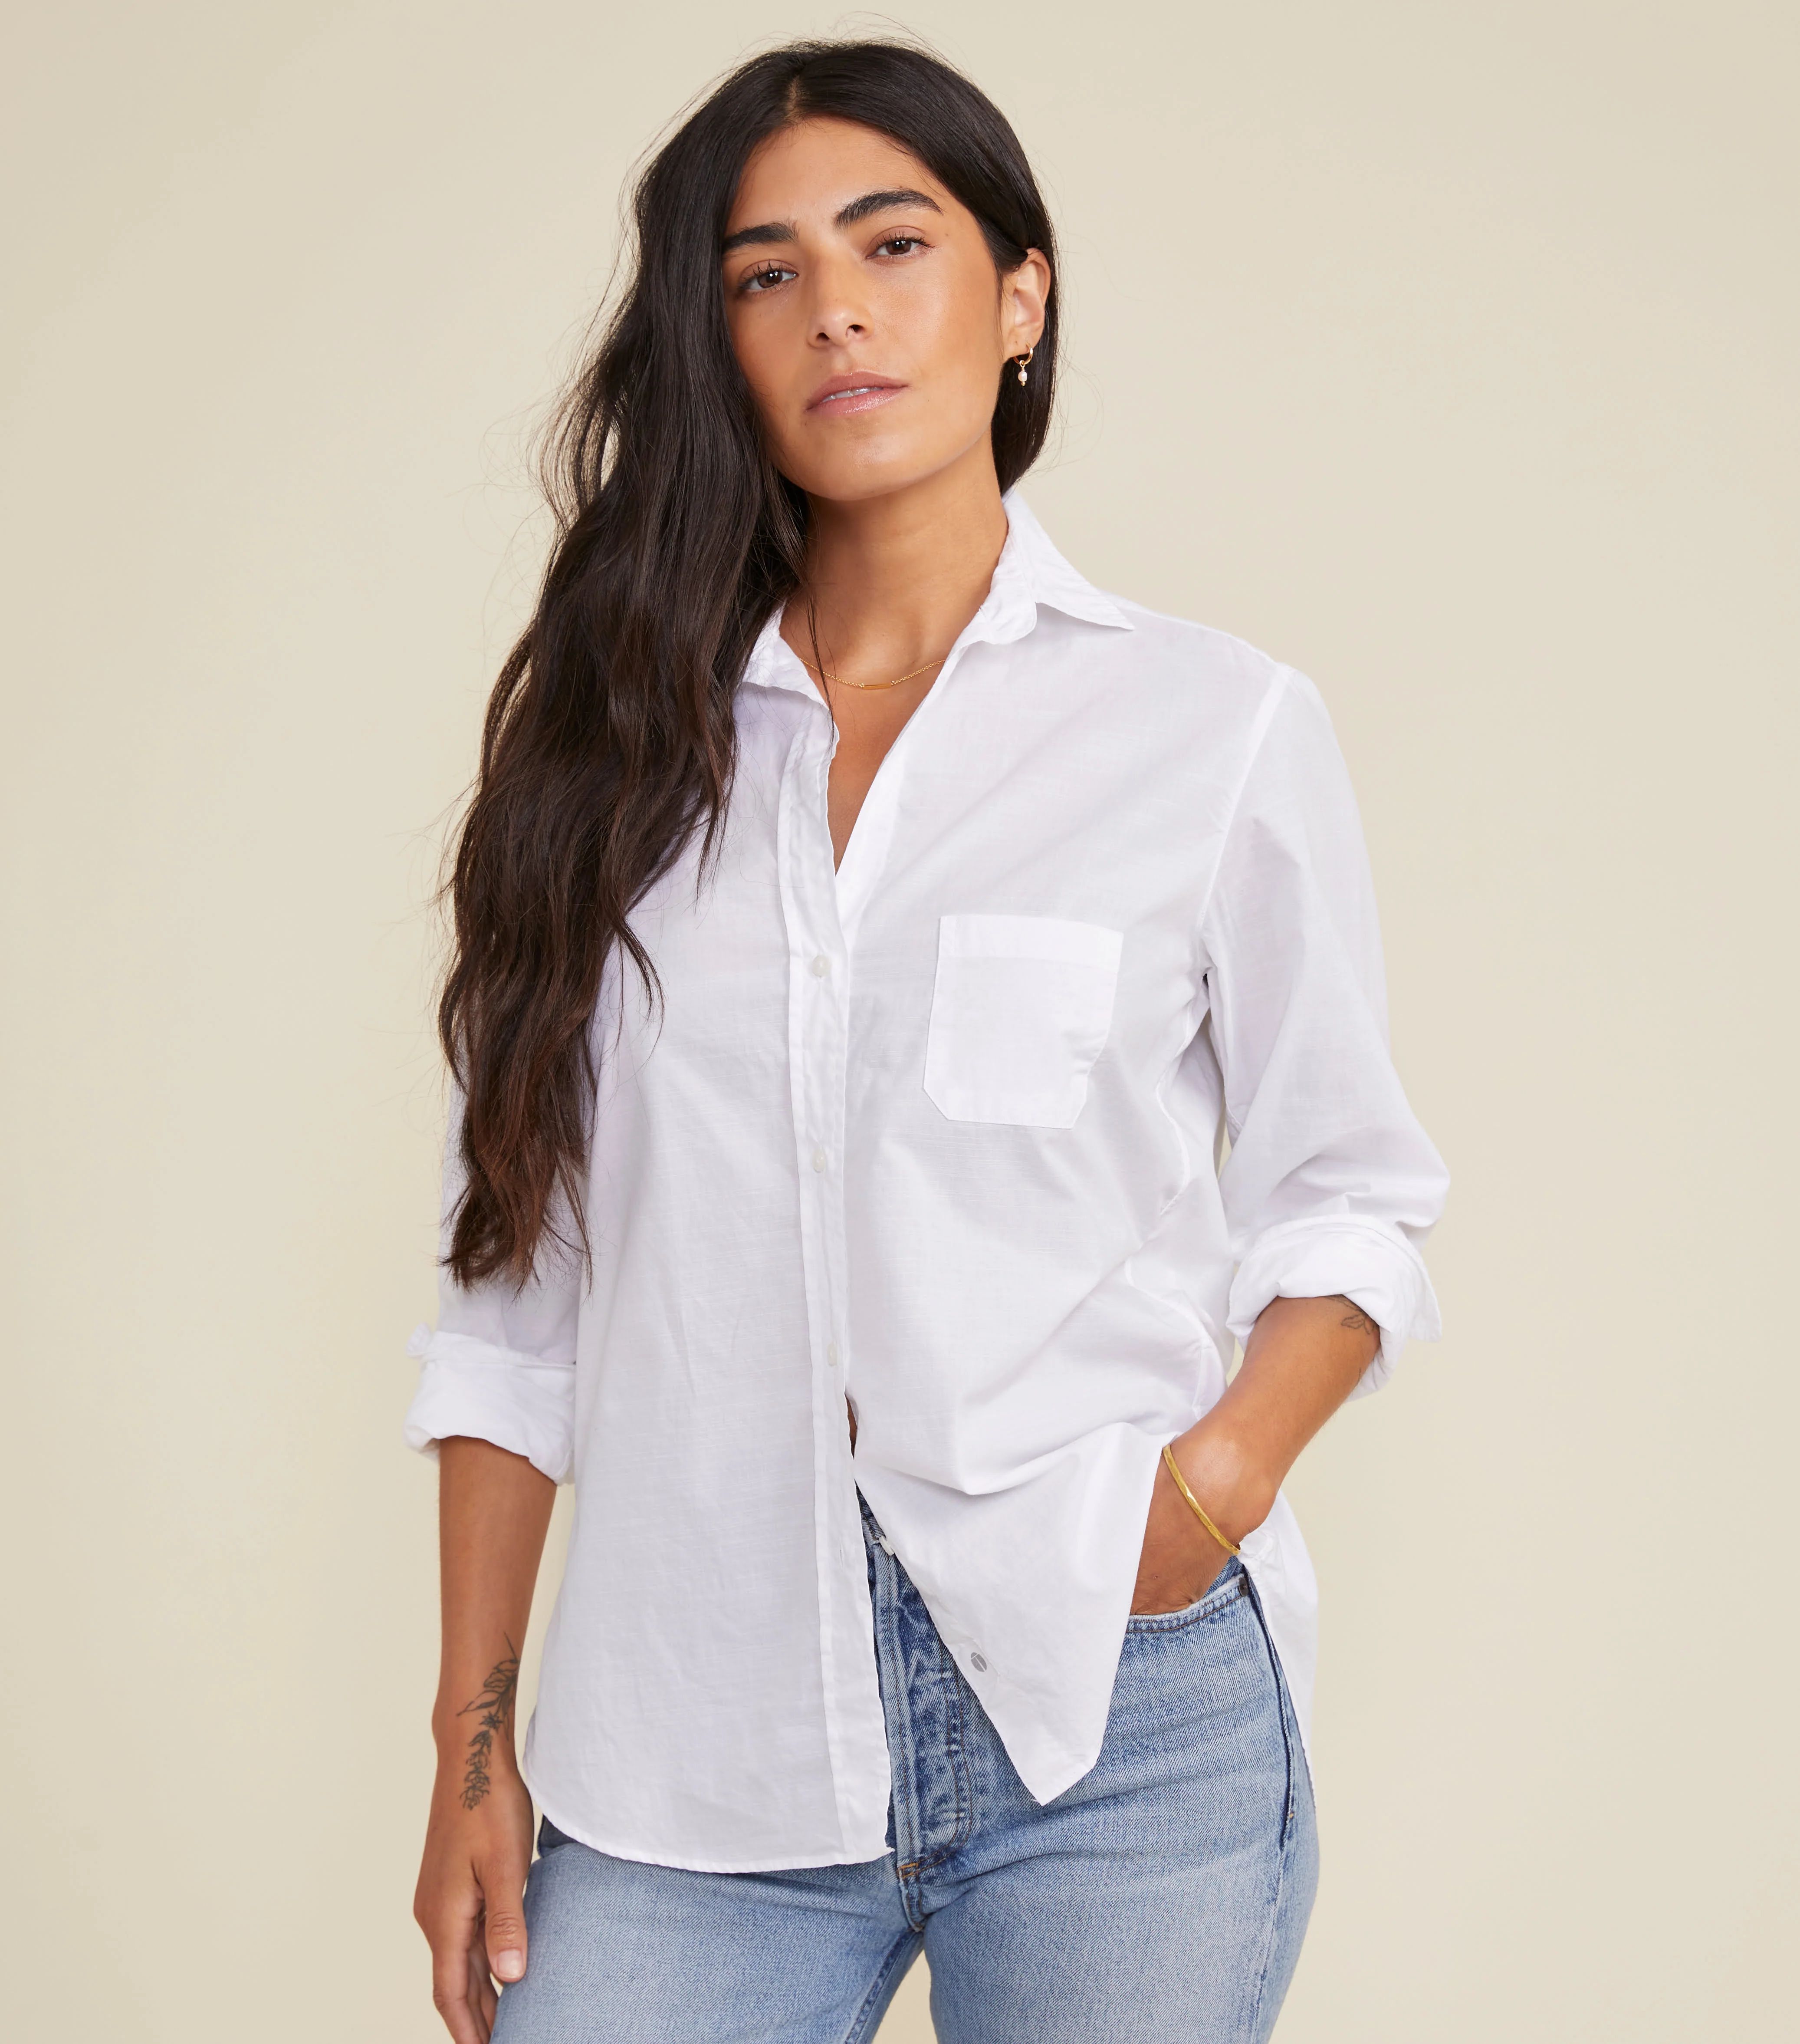 The Hero Button-Up Shirt Classic White, Washed Cotton | Grayson